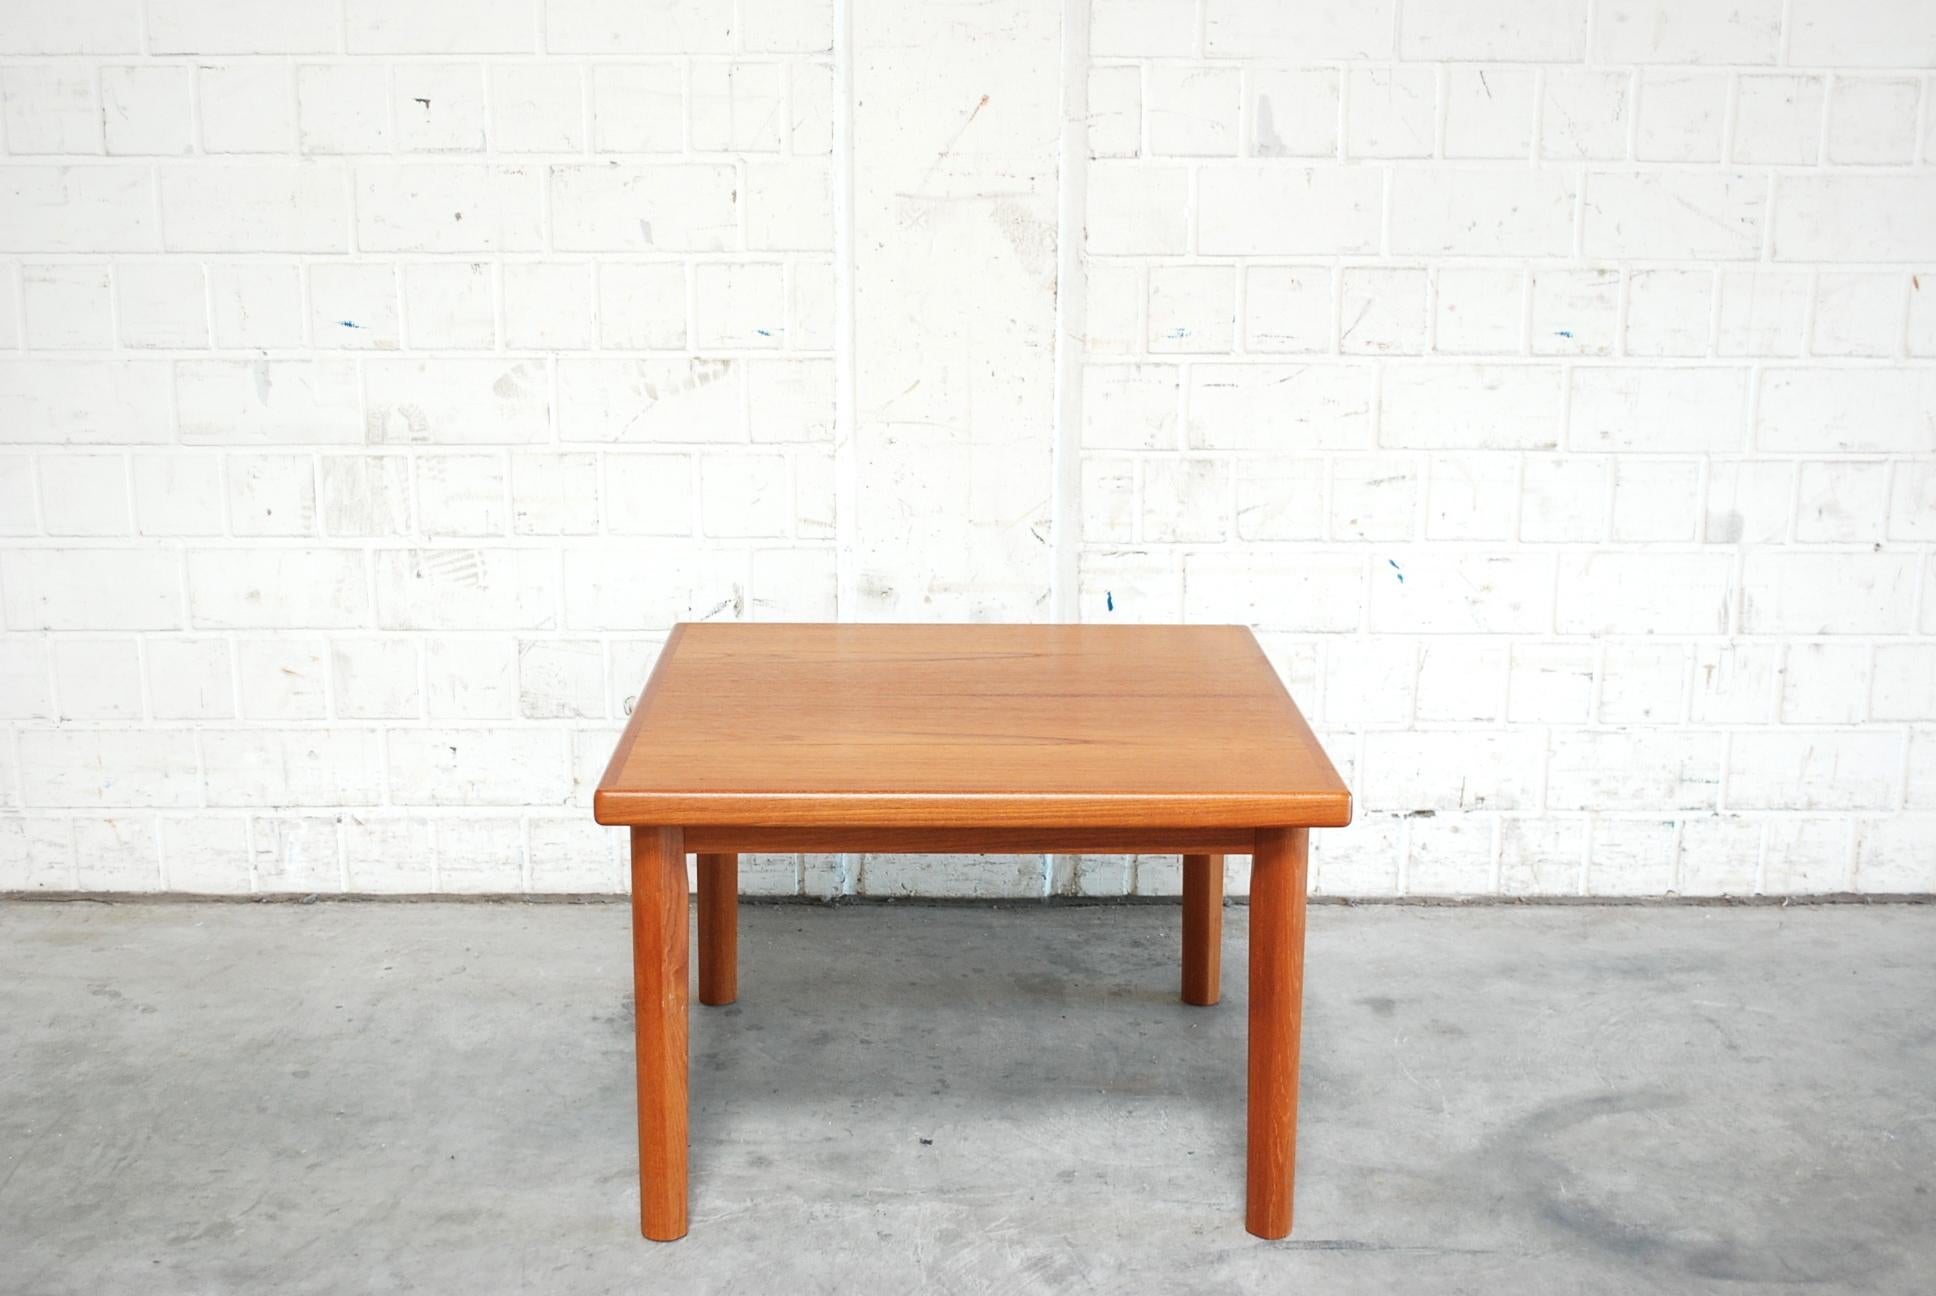 Danish Modern coffee table in oiled teak wood. 
Manufactured by BRDR Furbo.
The table has a square measure that could fits in the corner between the Sofas.
In very good condition.